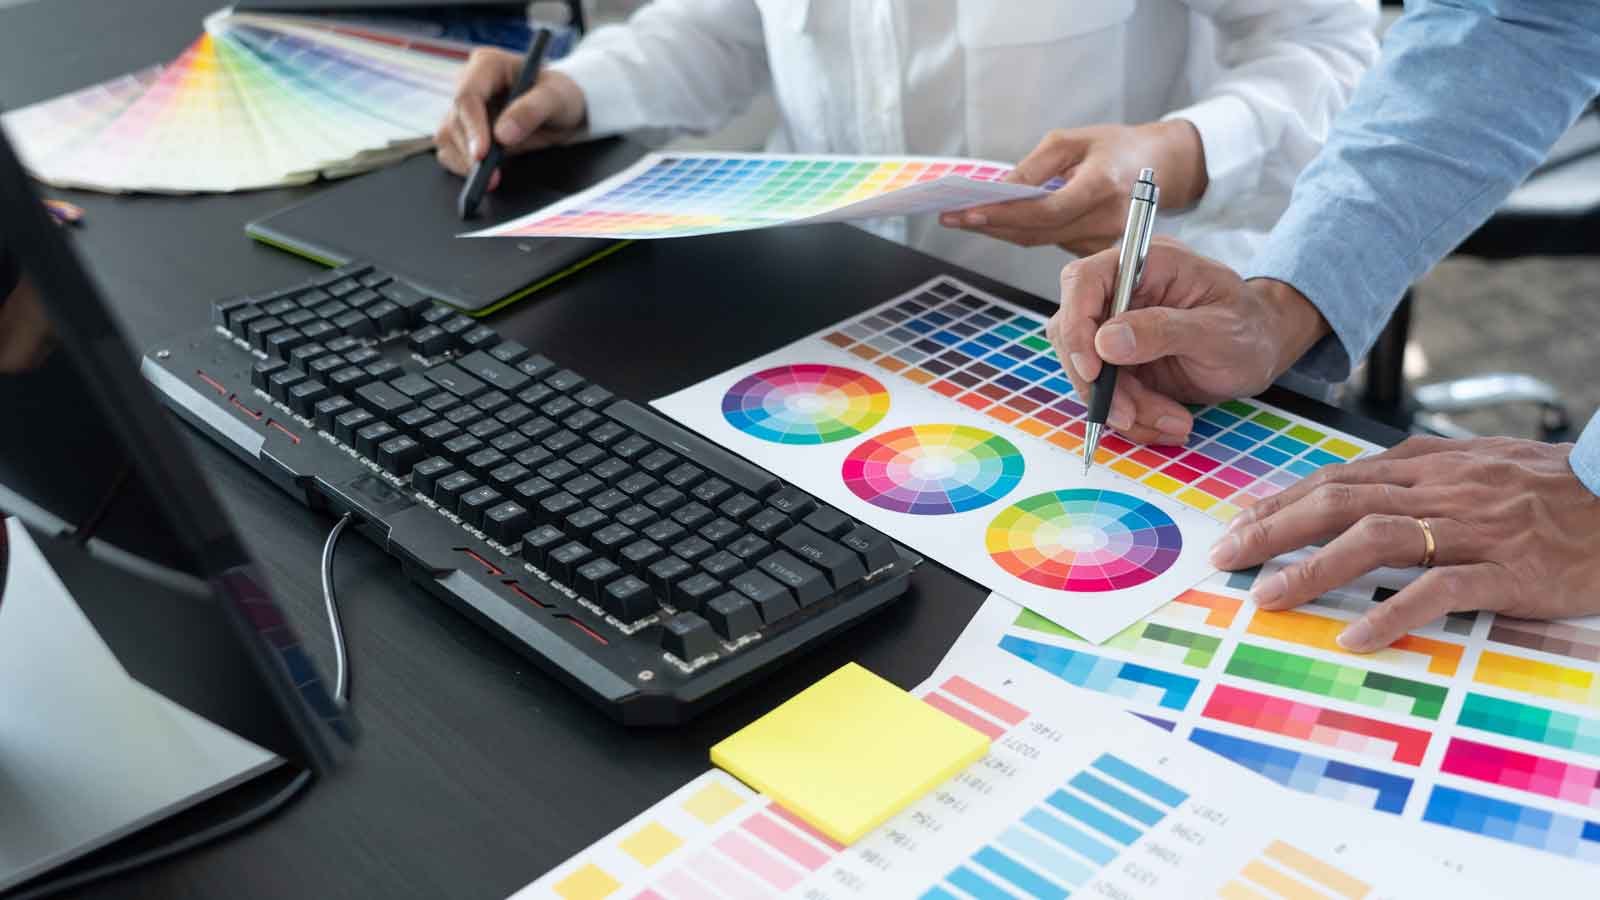 in raise design studio why you want a cugraphic designer team working web design using color swatches editing artwork using tablet stylus desks creative office